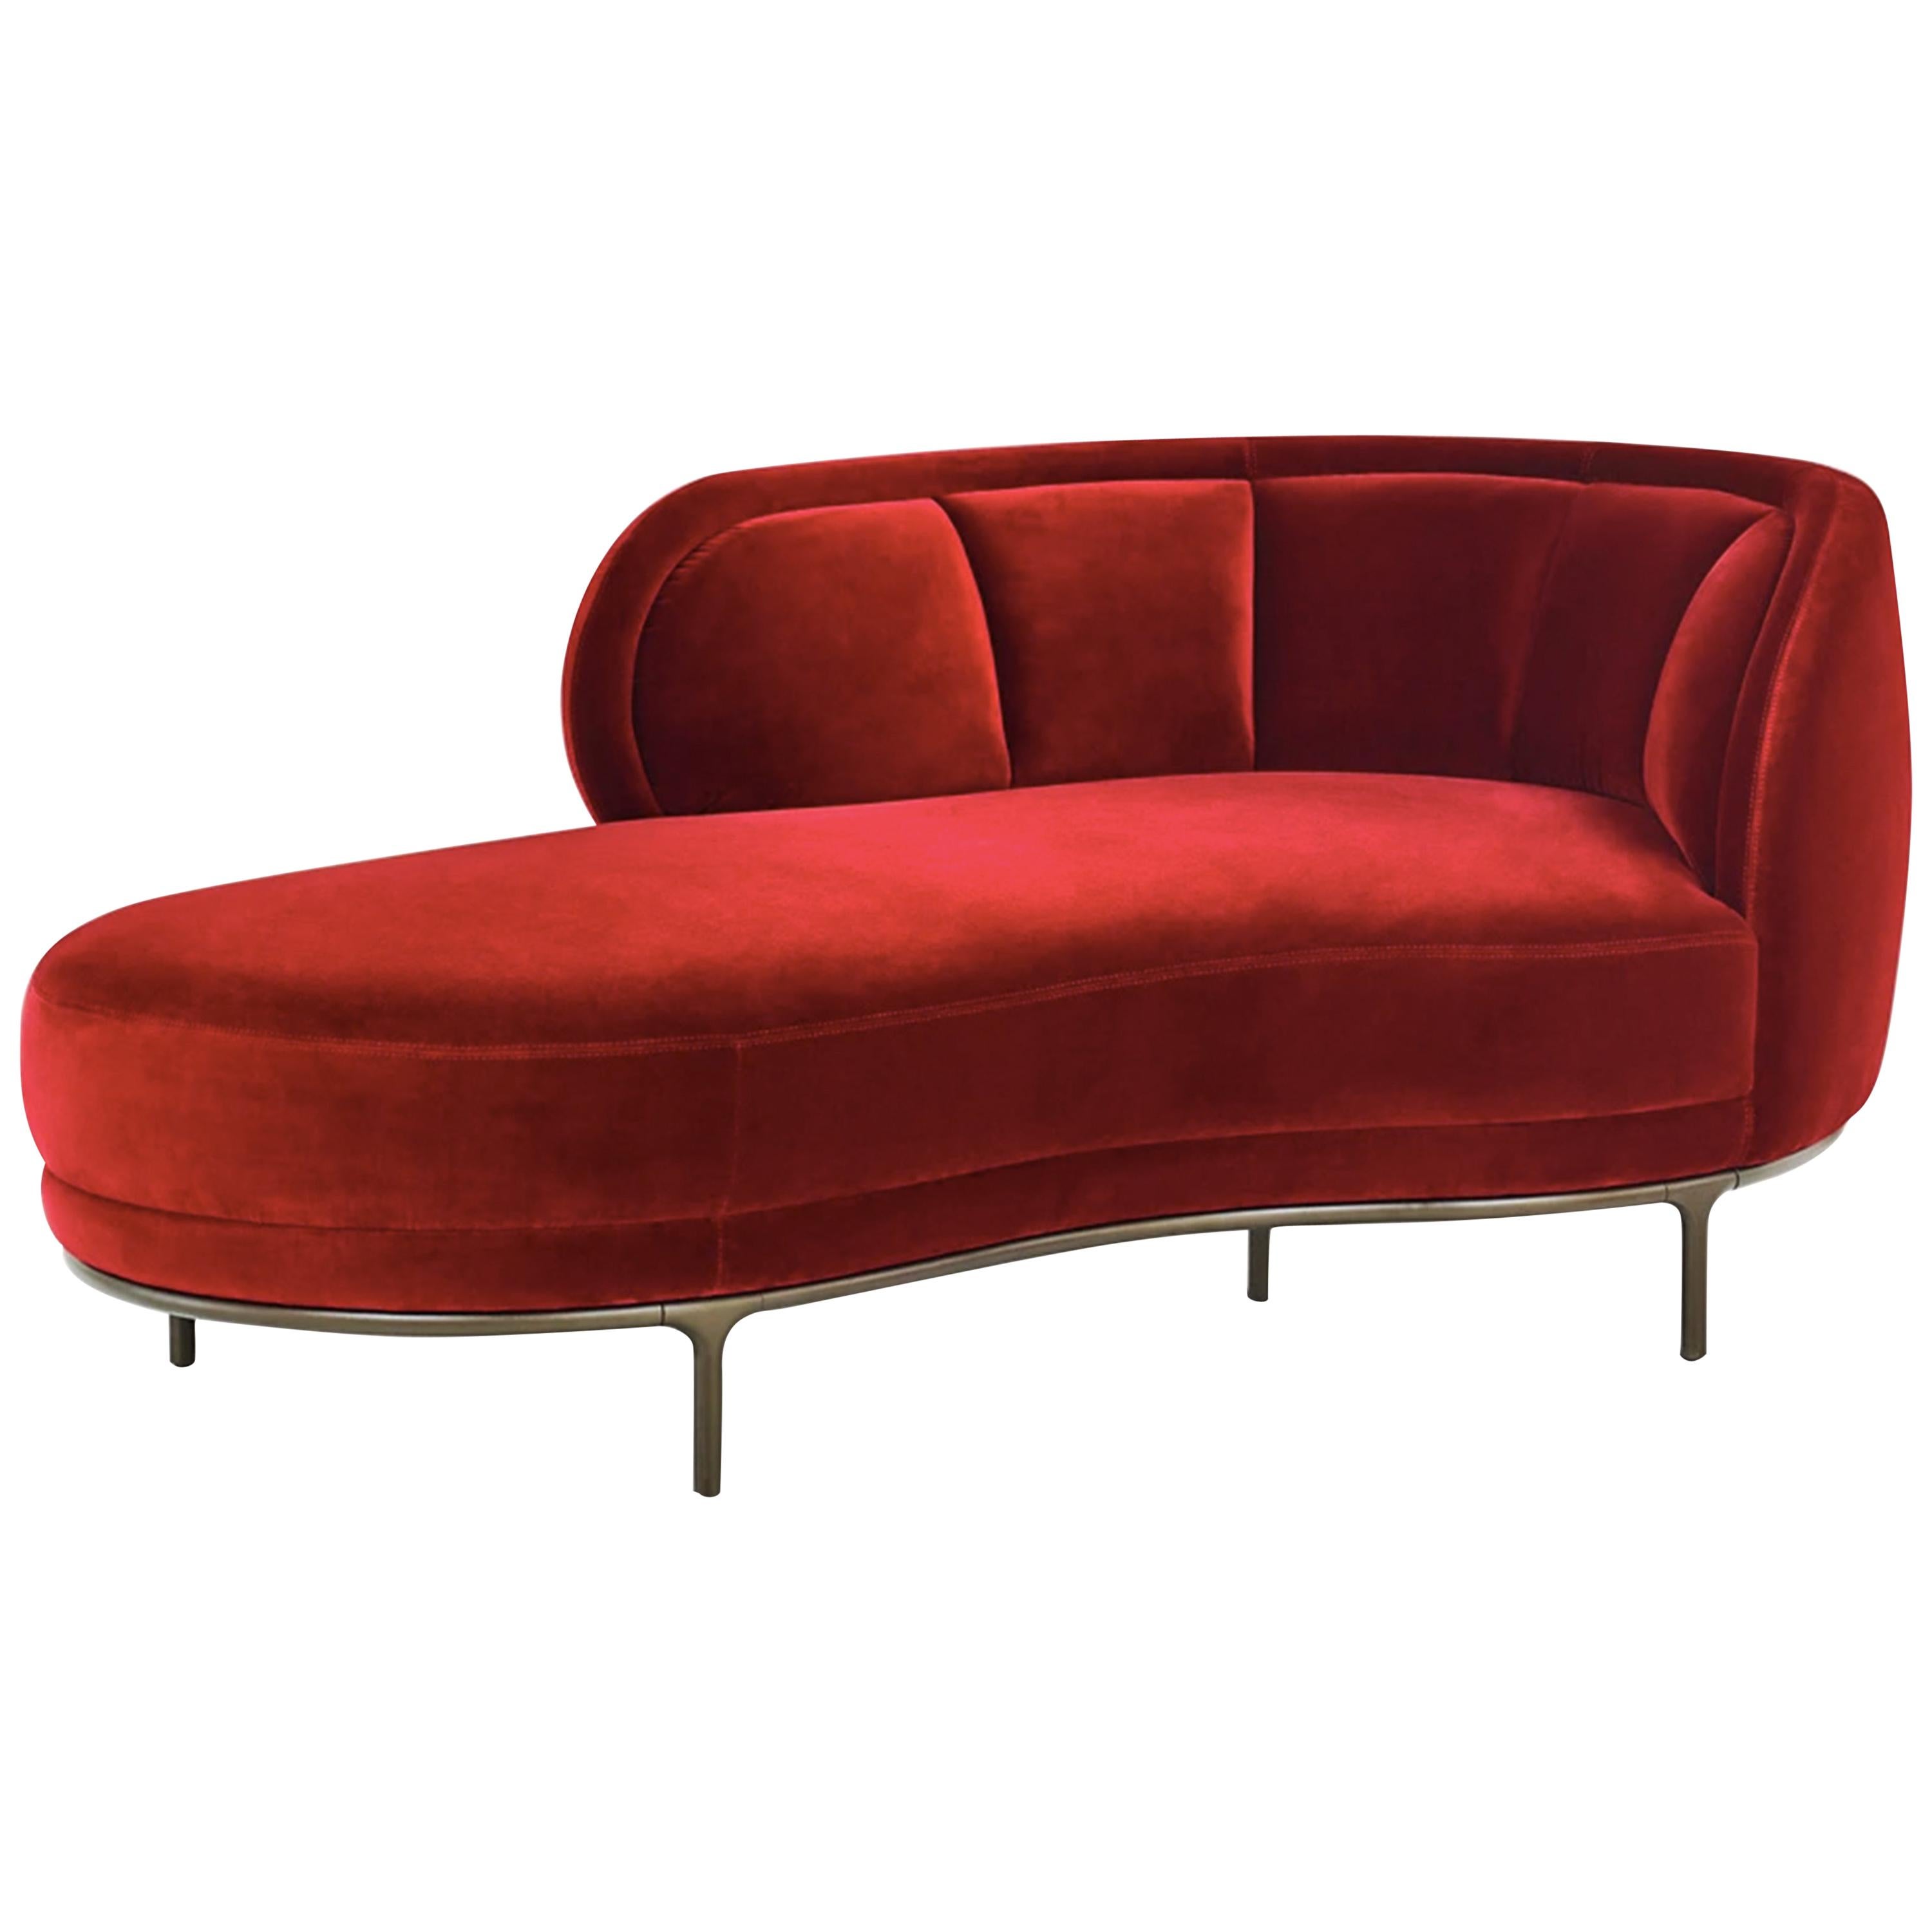 Customizable Wittmann Vuelta Chaise Lounge by Jaime Hayon For Sale